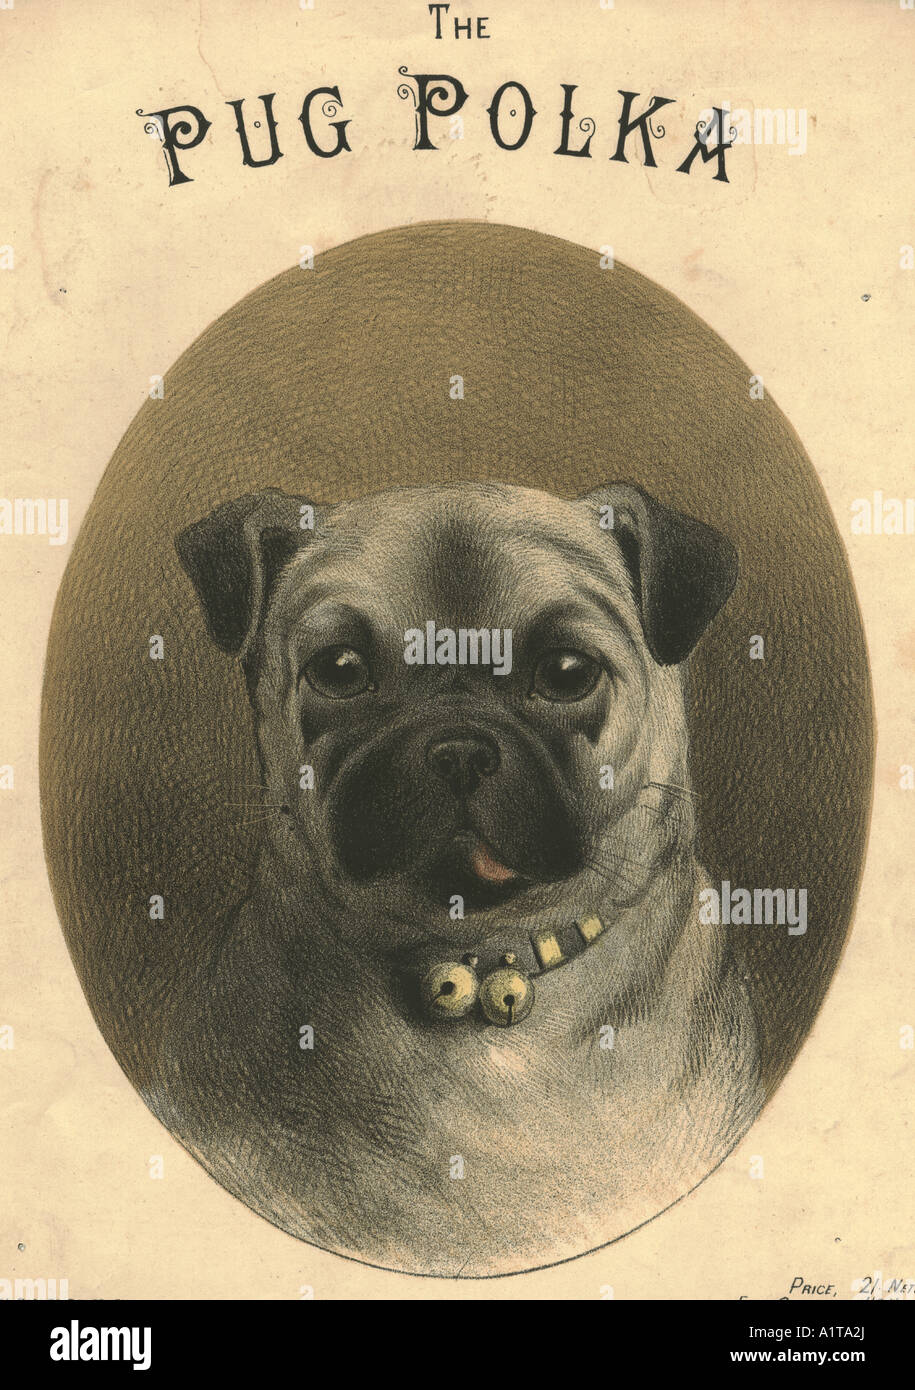 Chromolithographed sheet music cover titled The Pug Polka circa 1880 lithographed by Thomas Packer Stock Photo